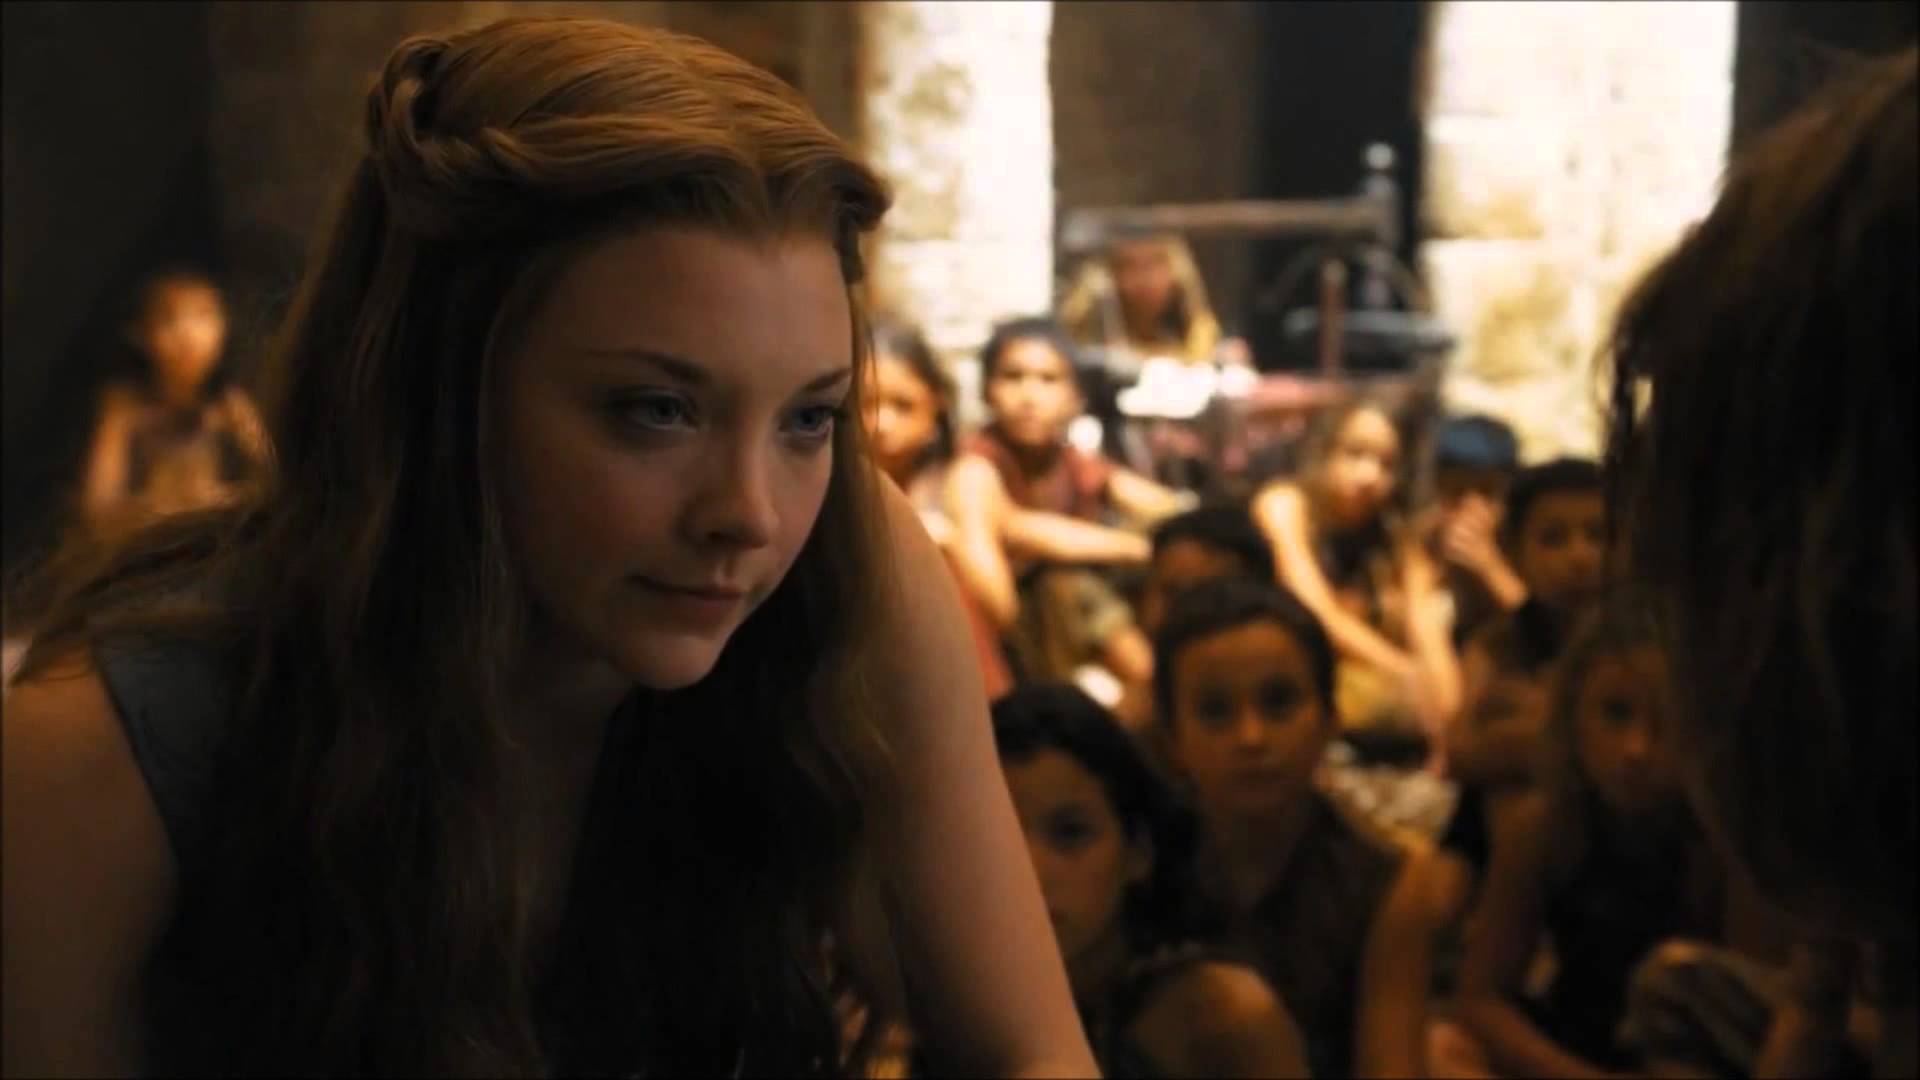 Margaery Tyrell Wallpapers Top Free Margaery Tyrell Backgrounds Wallpaperaccess 8966